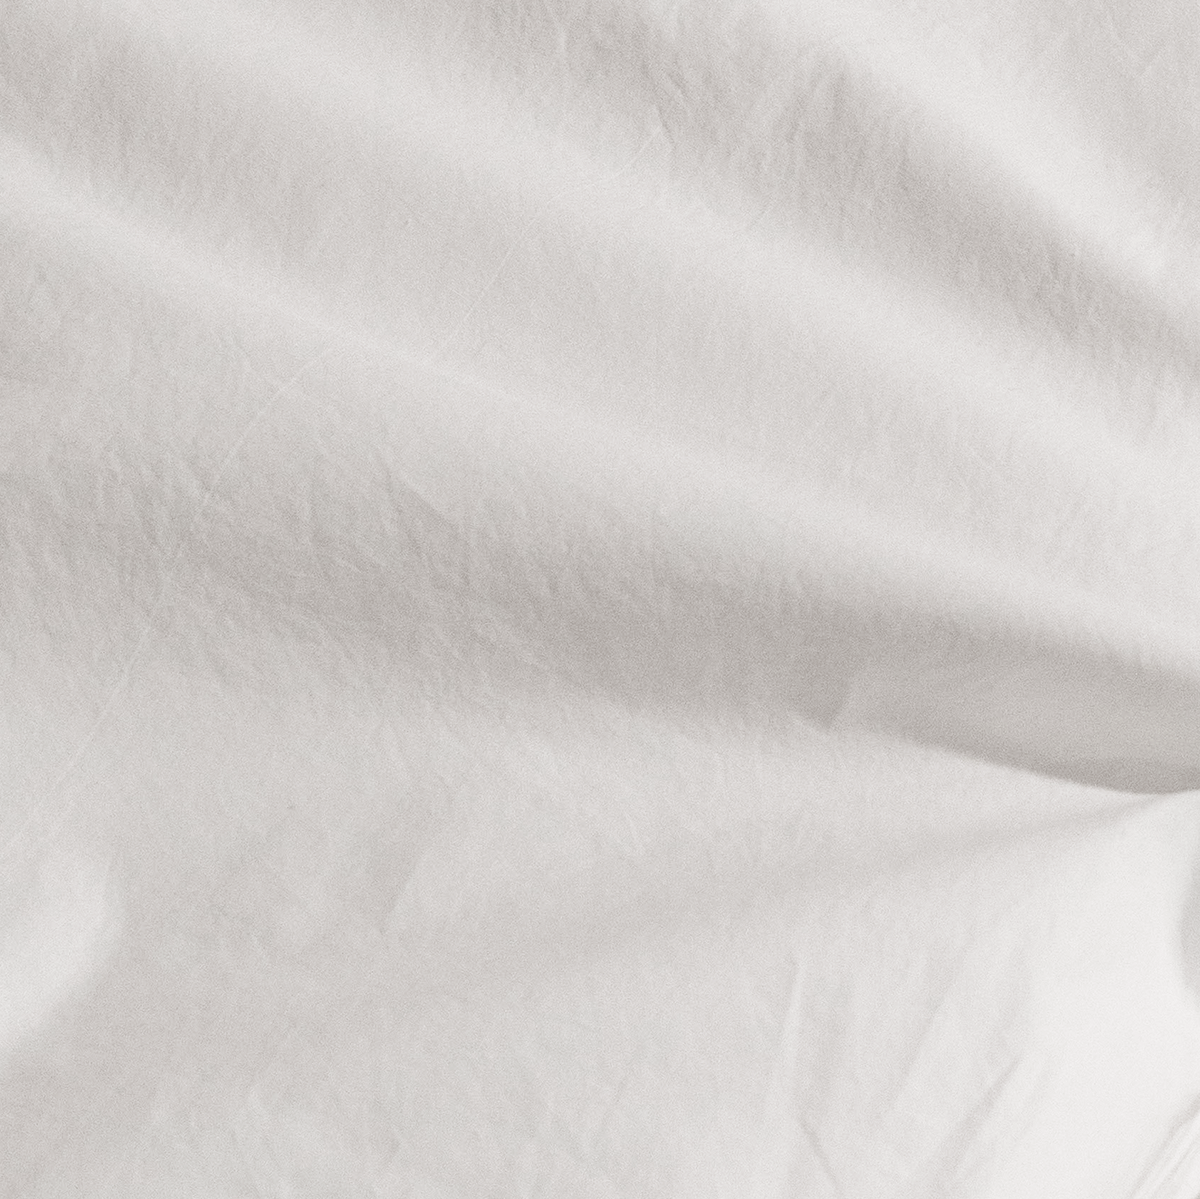 Close up of white percale duvet cover